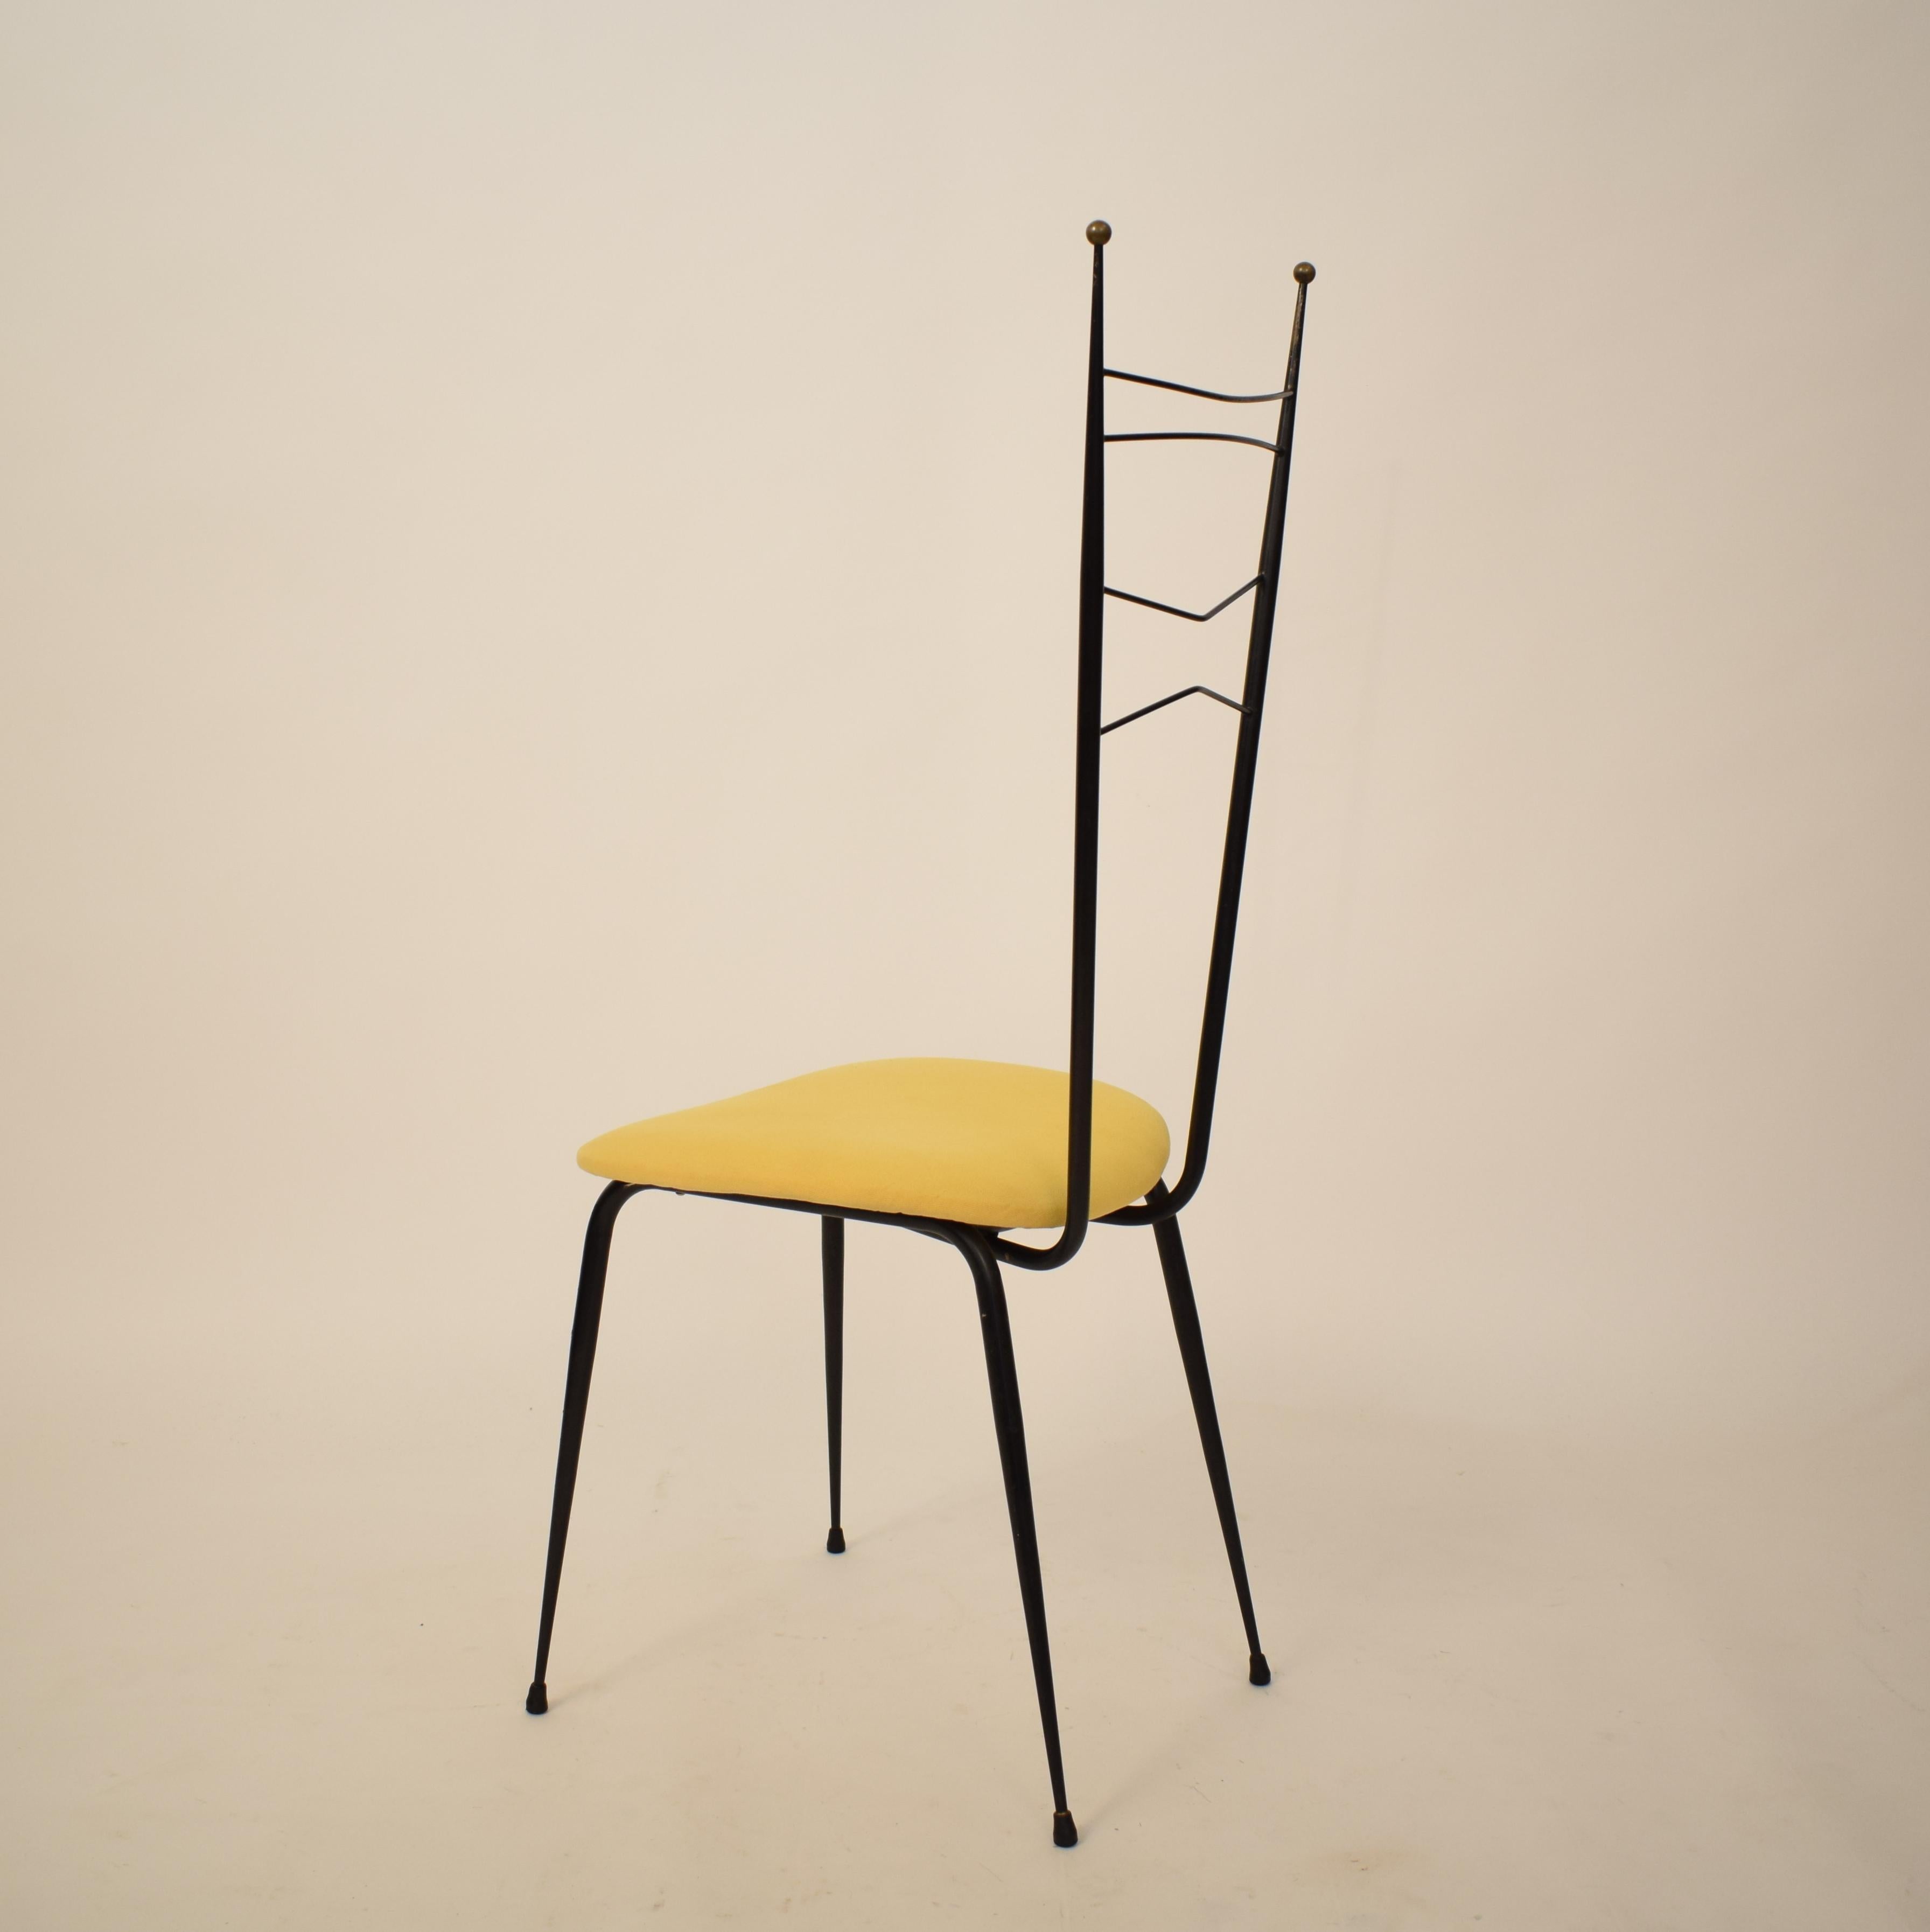 Metal Midcentury Italian Black and Yellow Dining Chairs Attributed to Ico Parisi, 1958